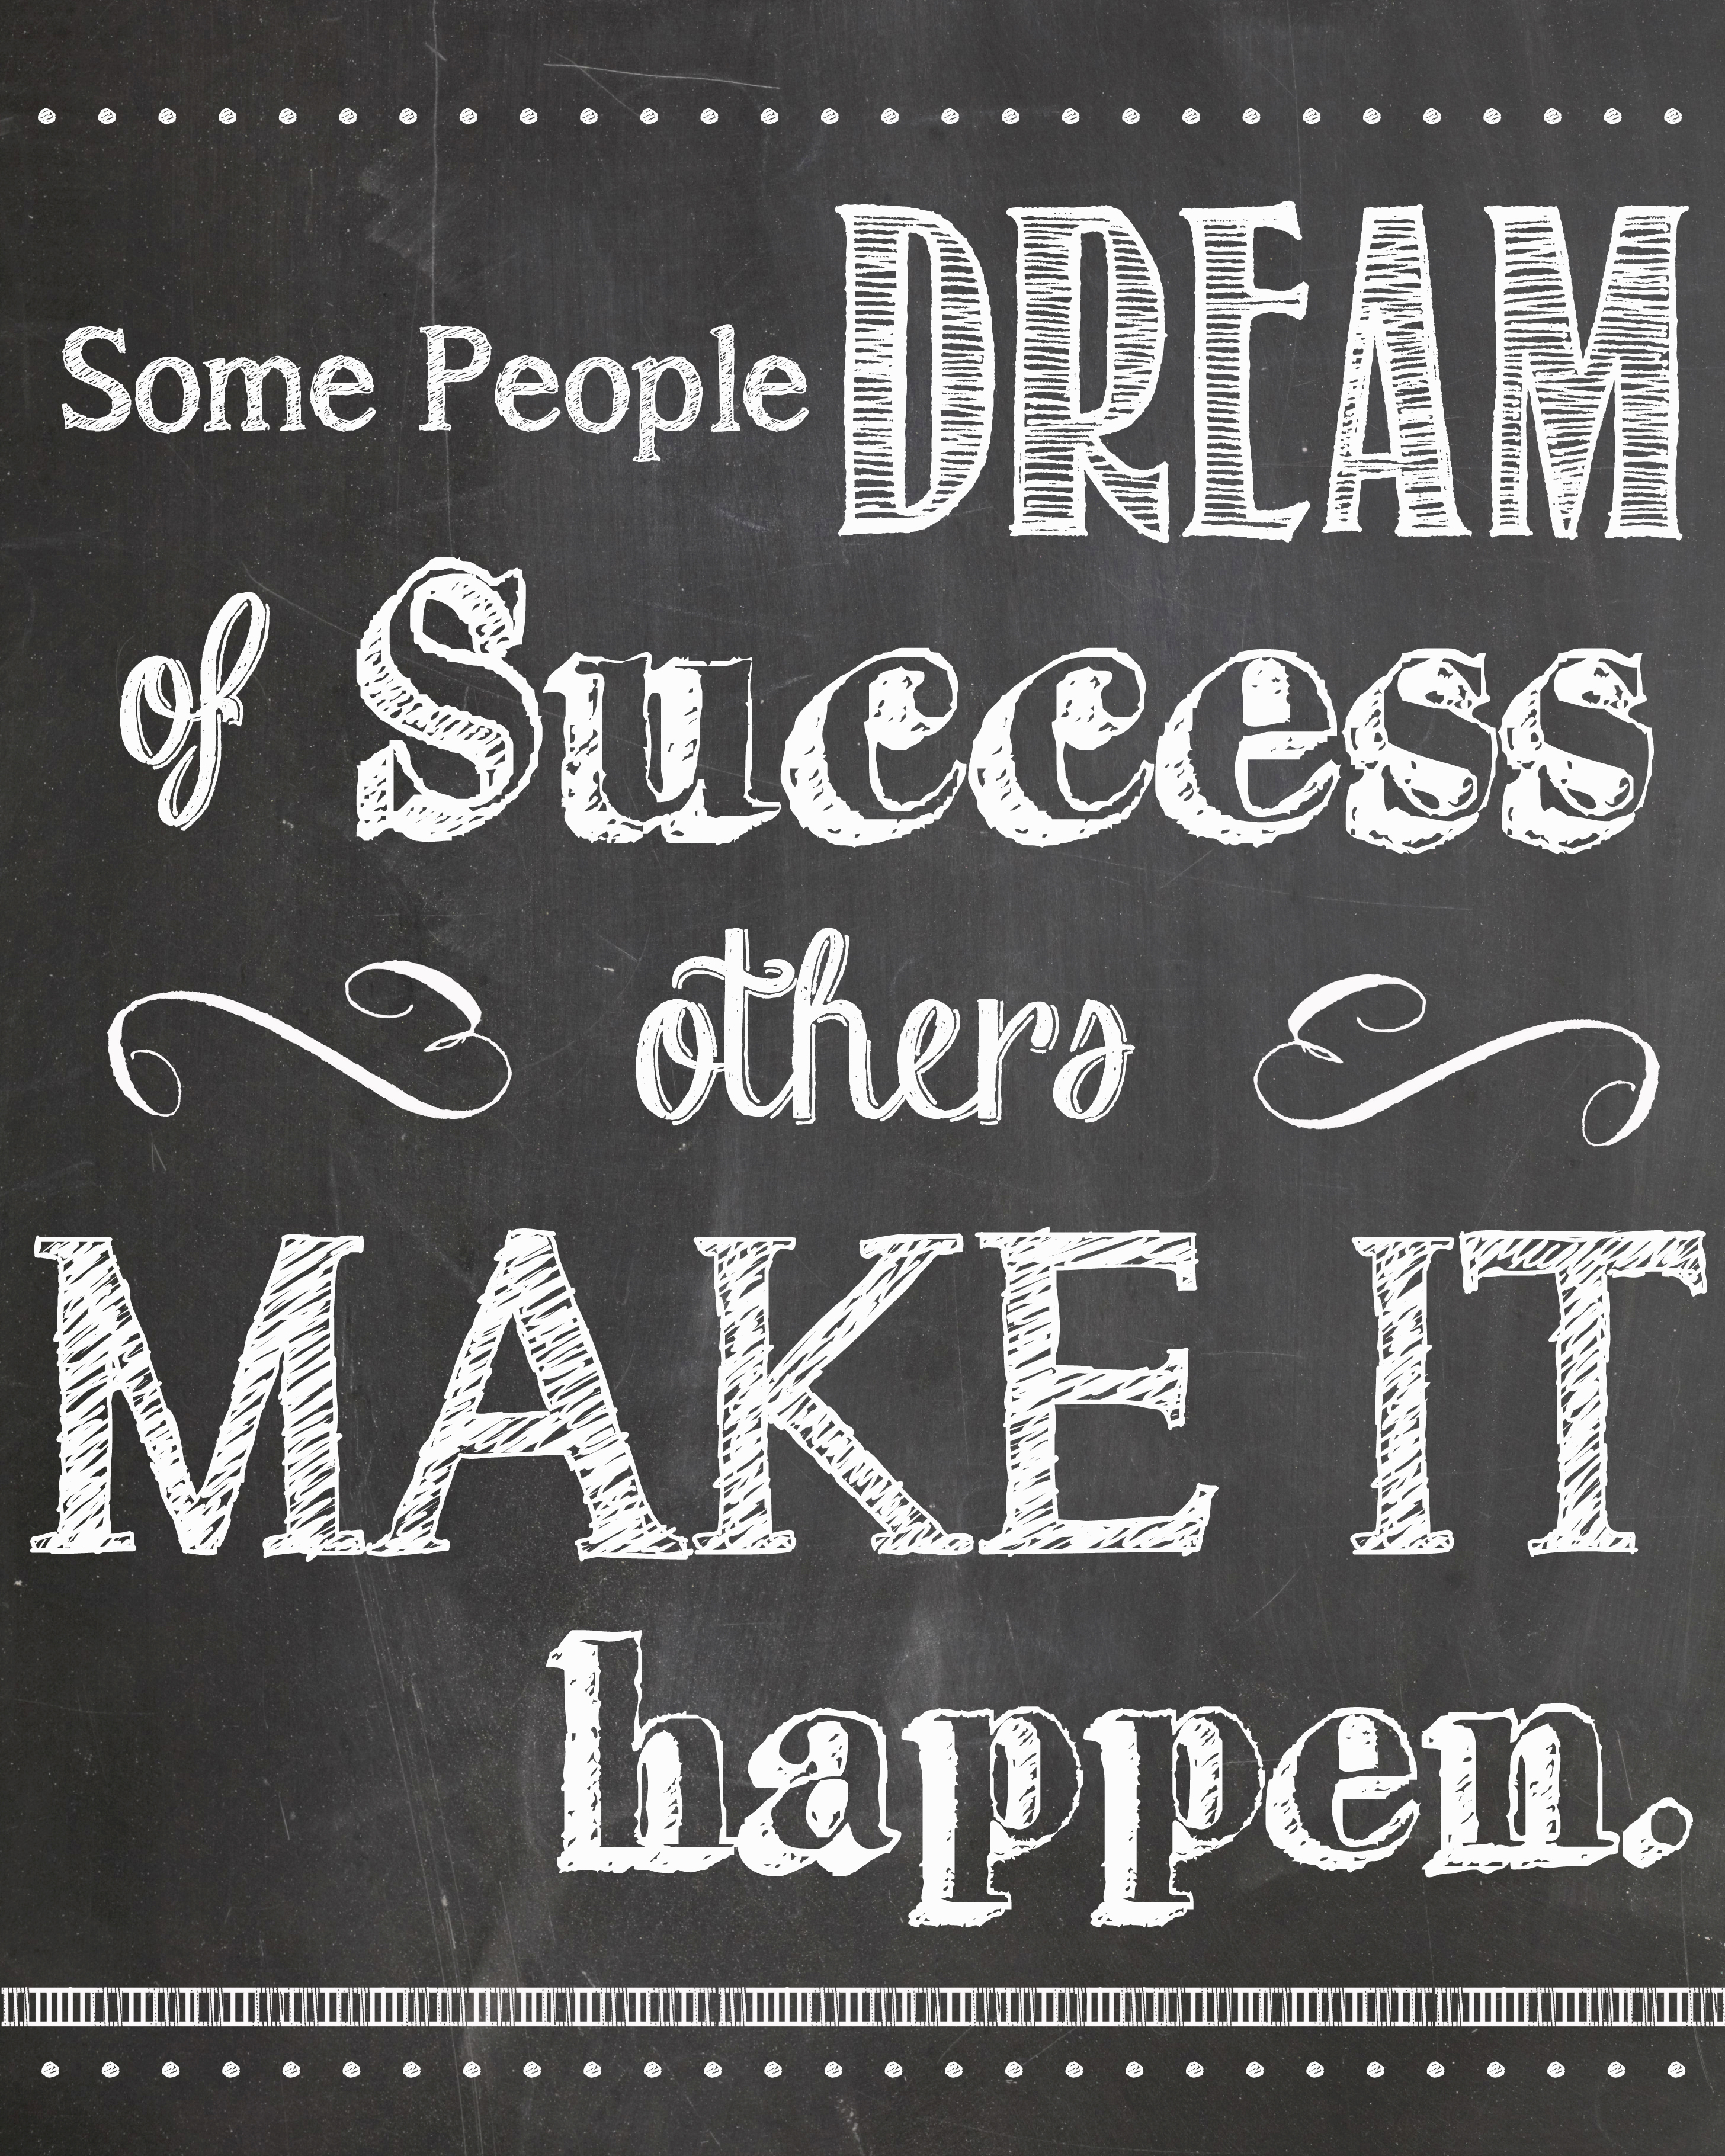 Make your happen. Make is happen. Some people. It happened to me бренд. Chalk up success.